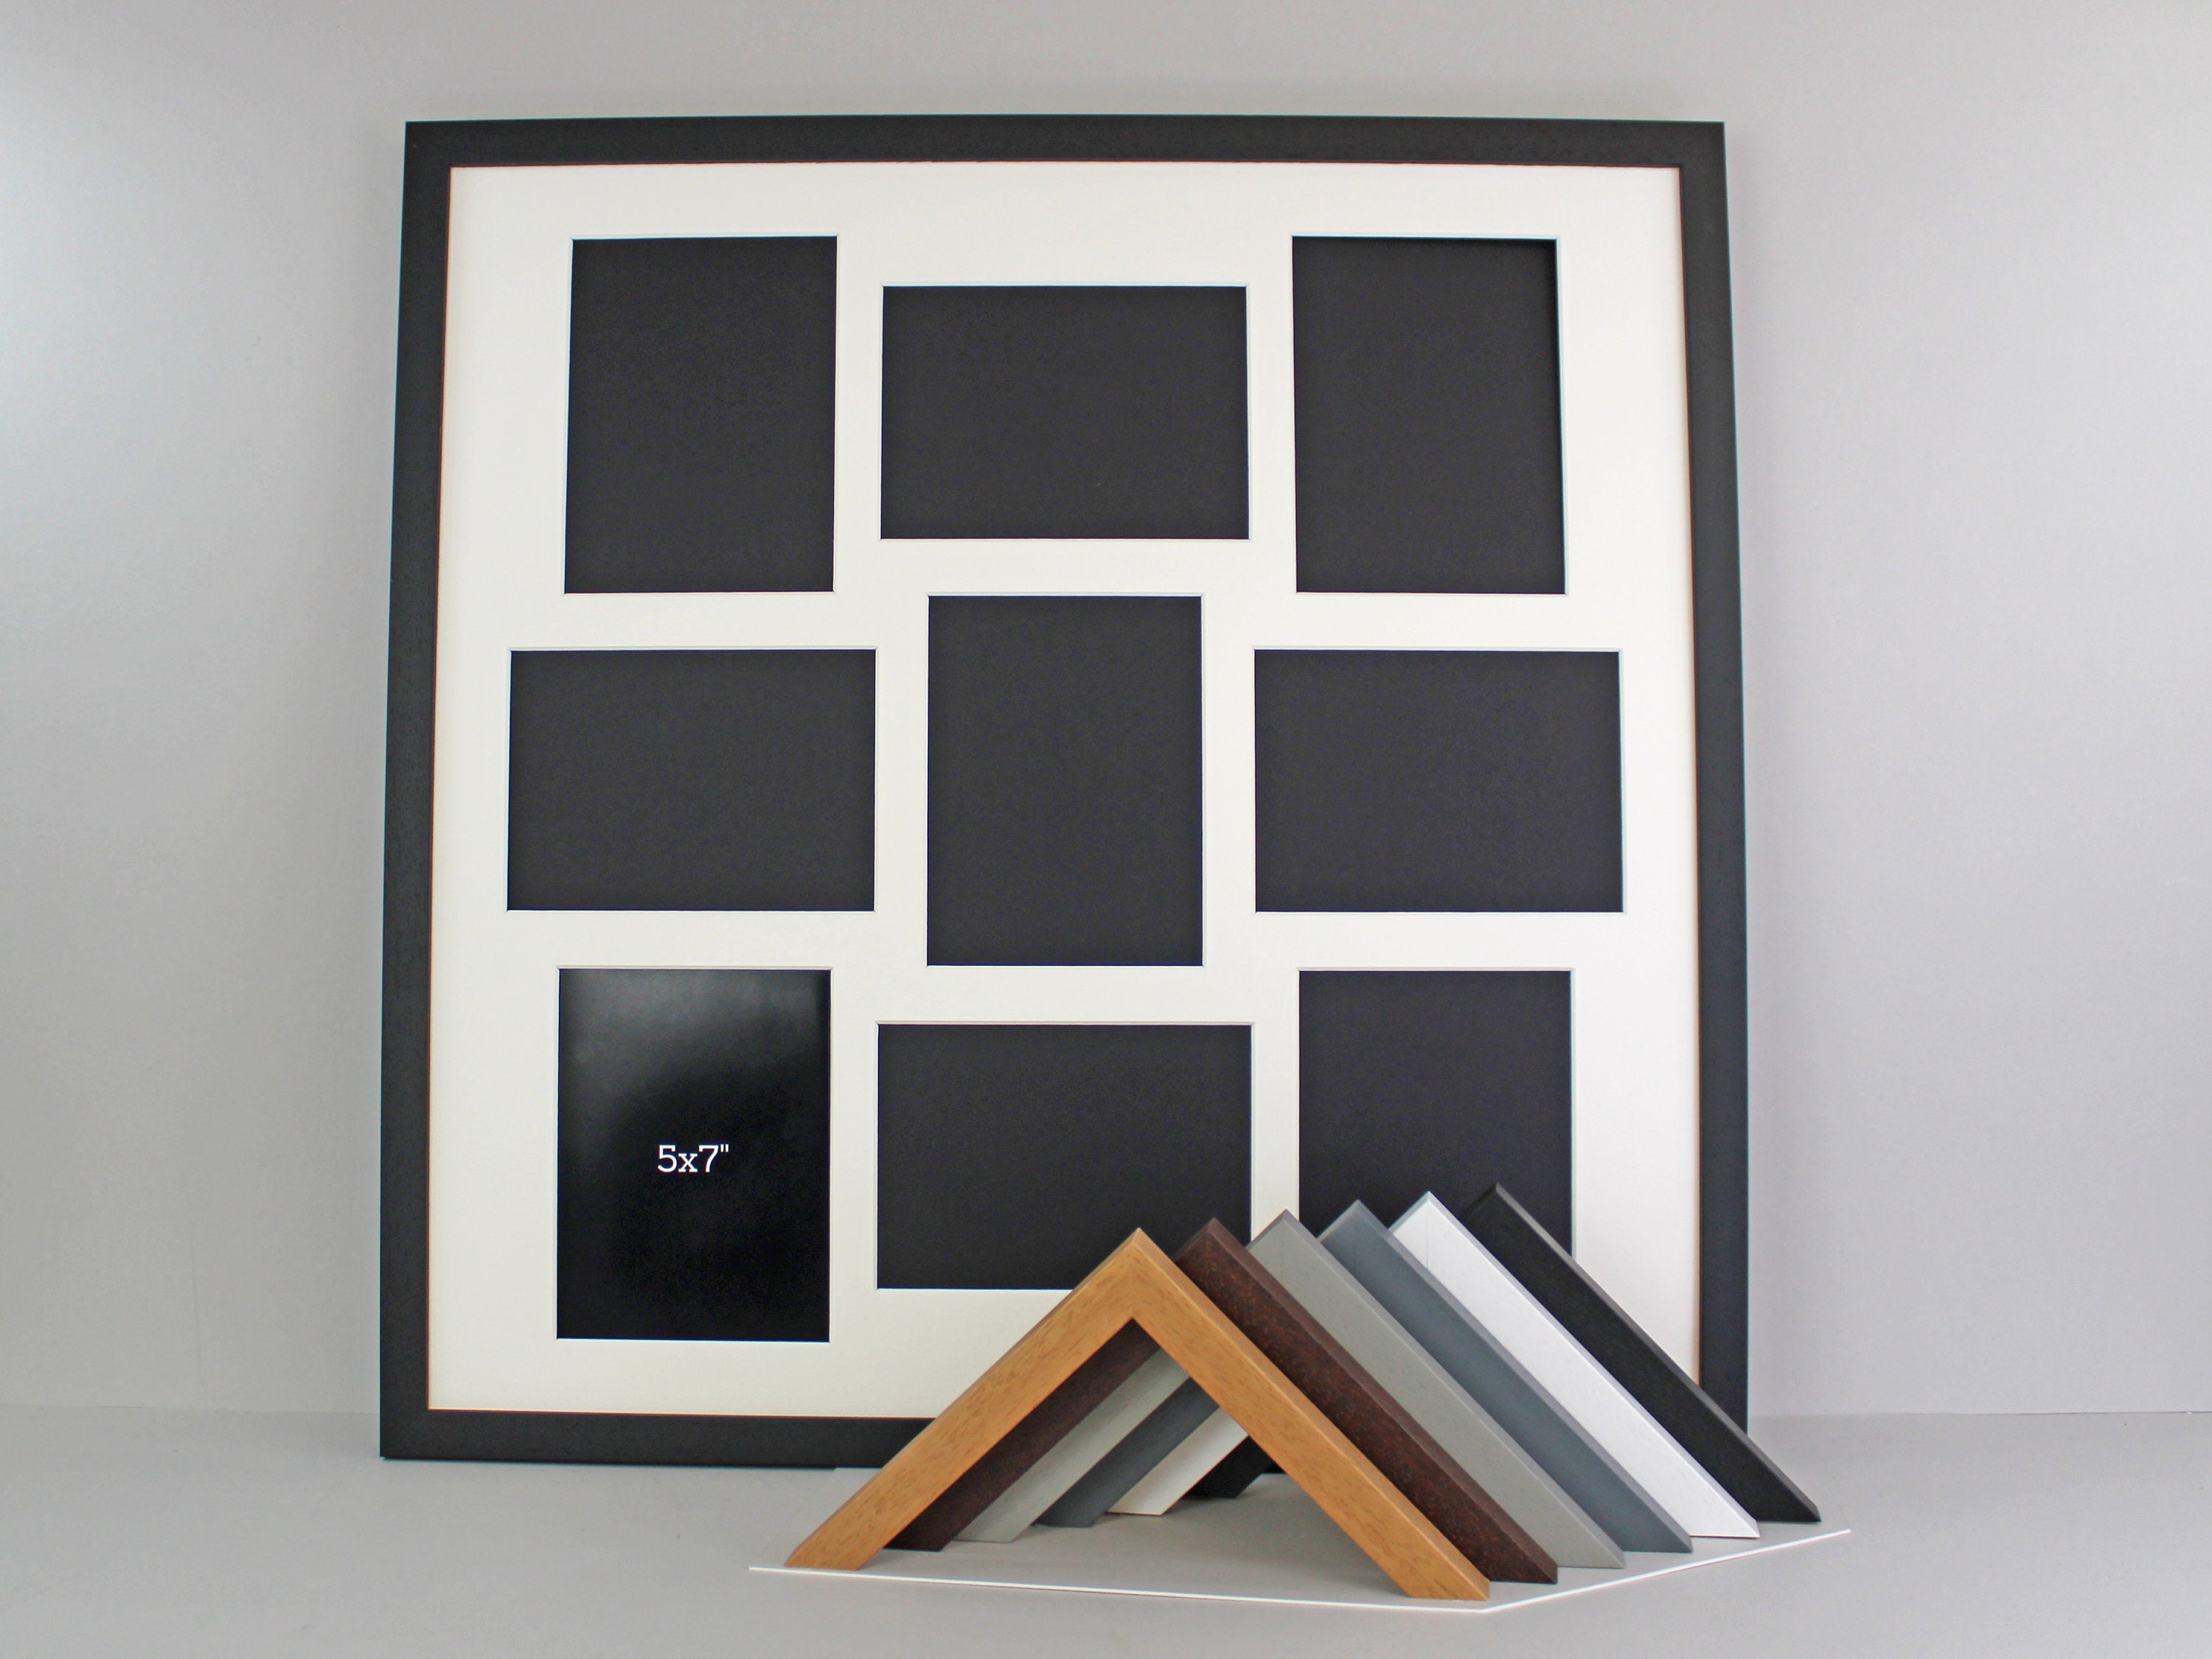 Multi Aperture Photo Frame. Holds Four 6x4 Photos. 30x40cm. Wooden Collage  Photo Frame. Handmade by Arthome 